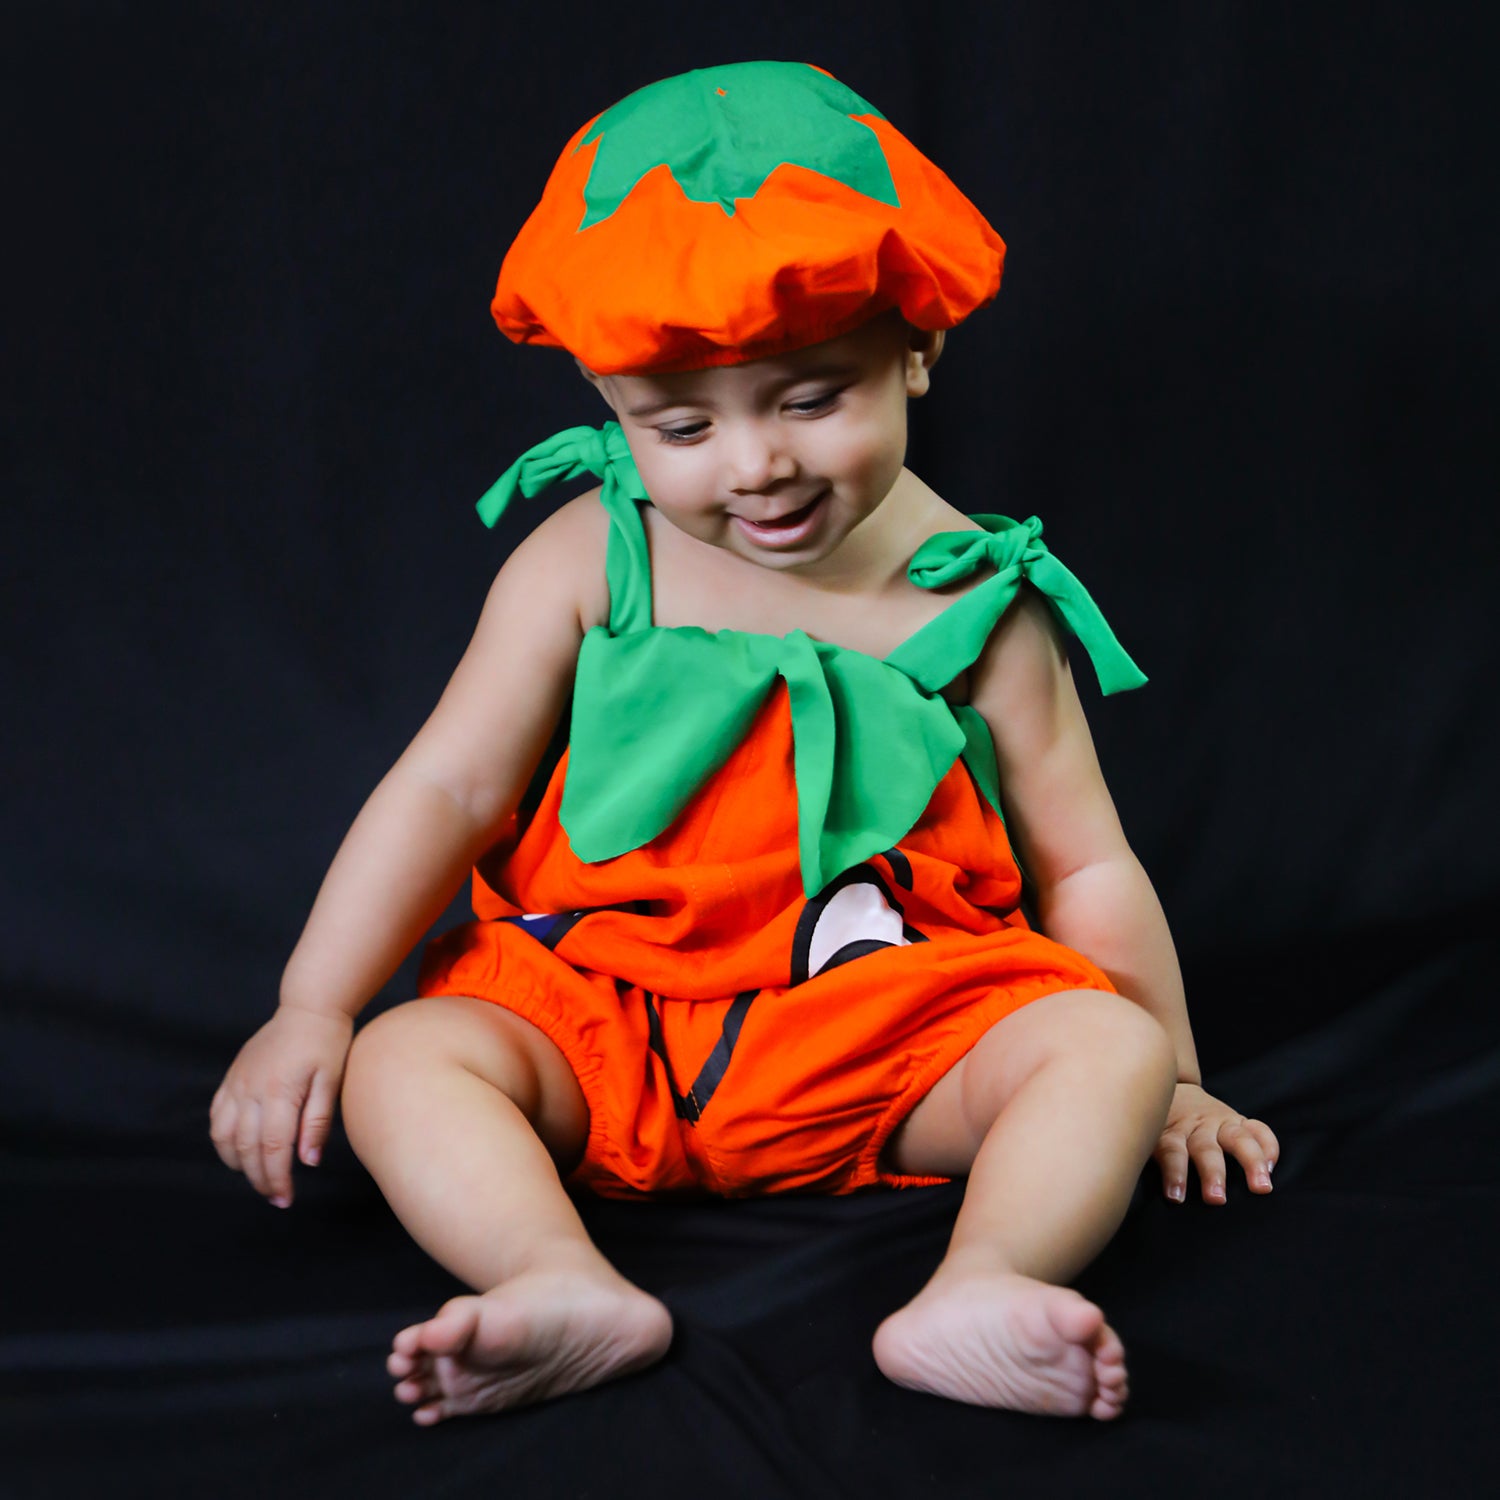 Child Fruit Costume Girls Boys Halloween Pear Suit Party Fancy Dress  Outfits | eBay